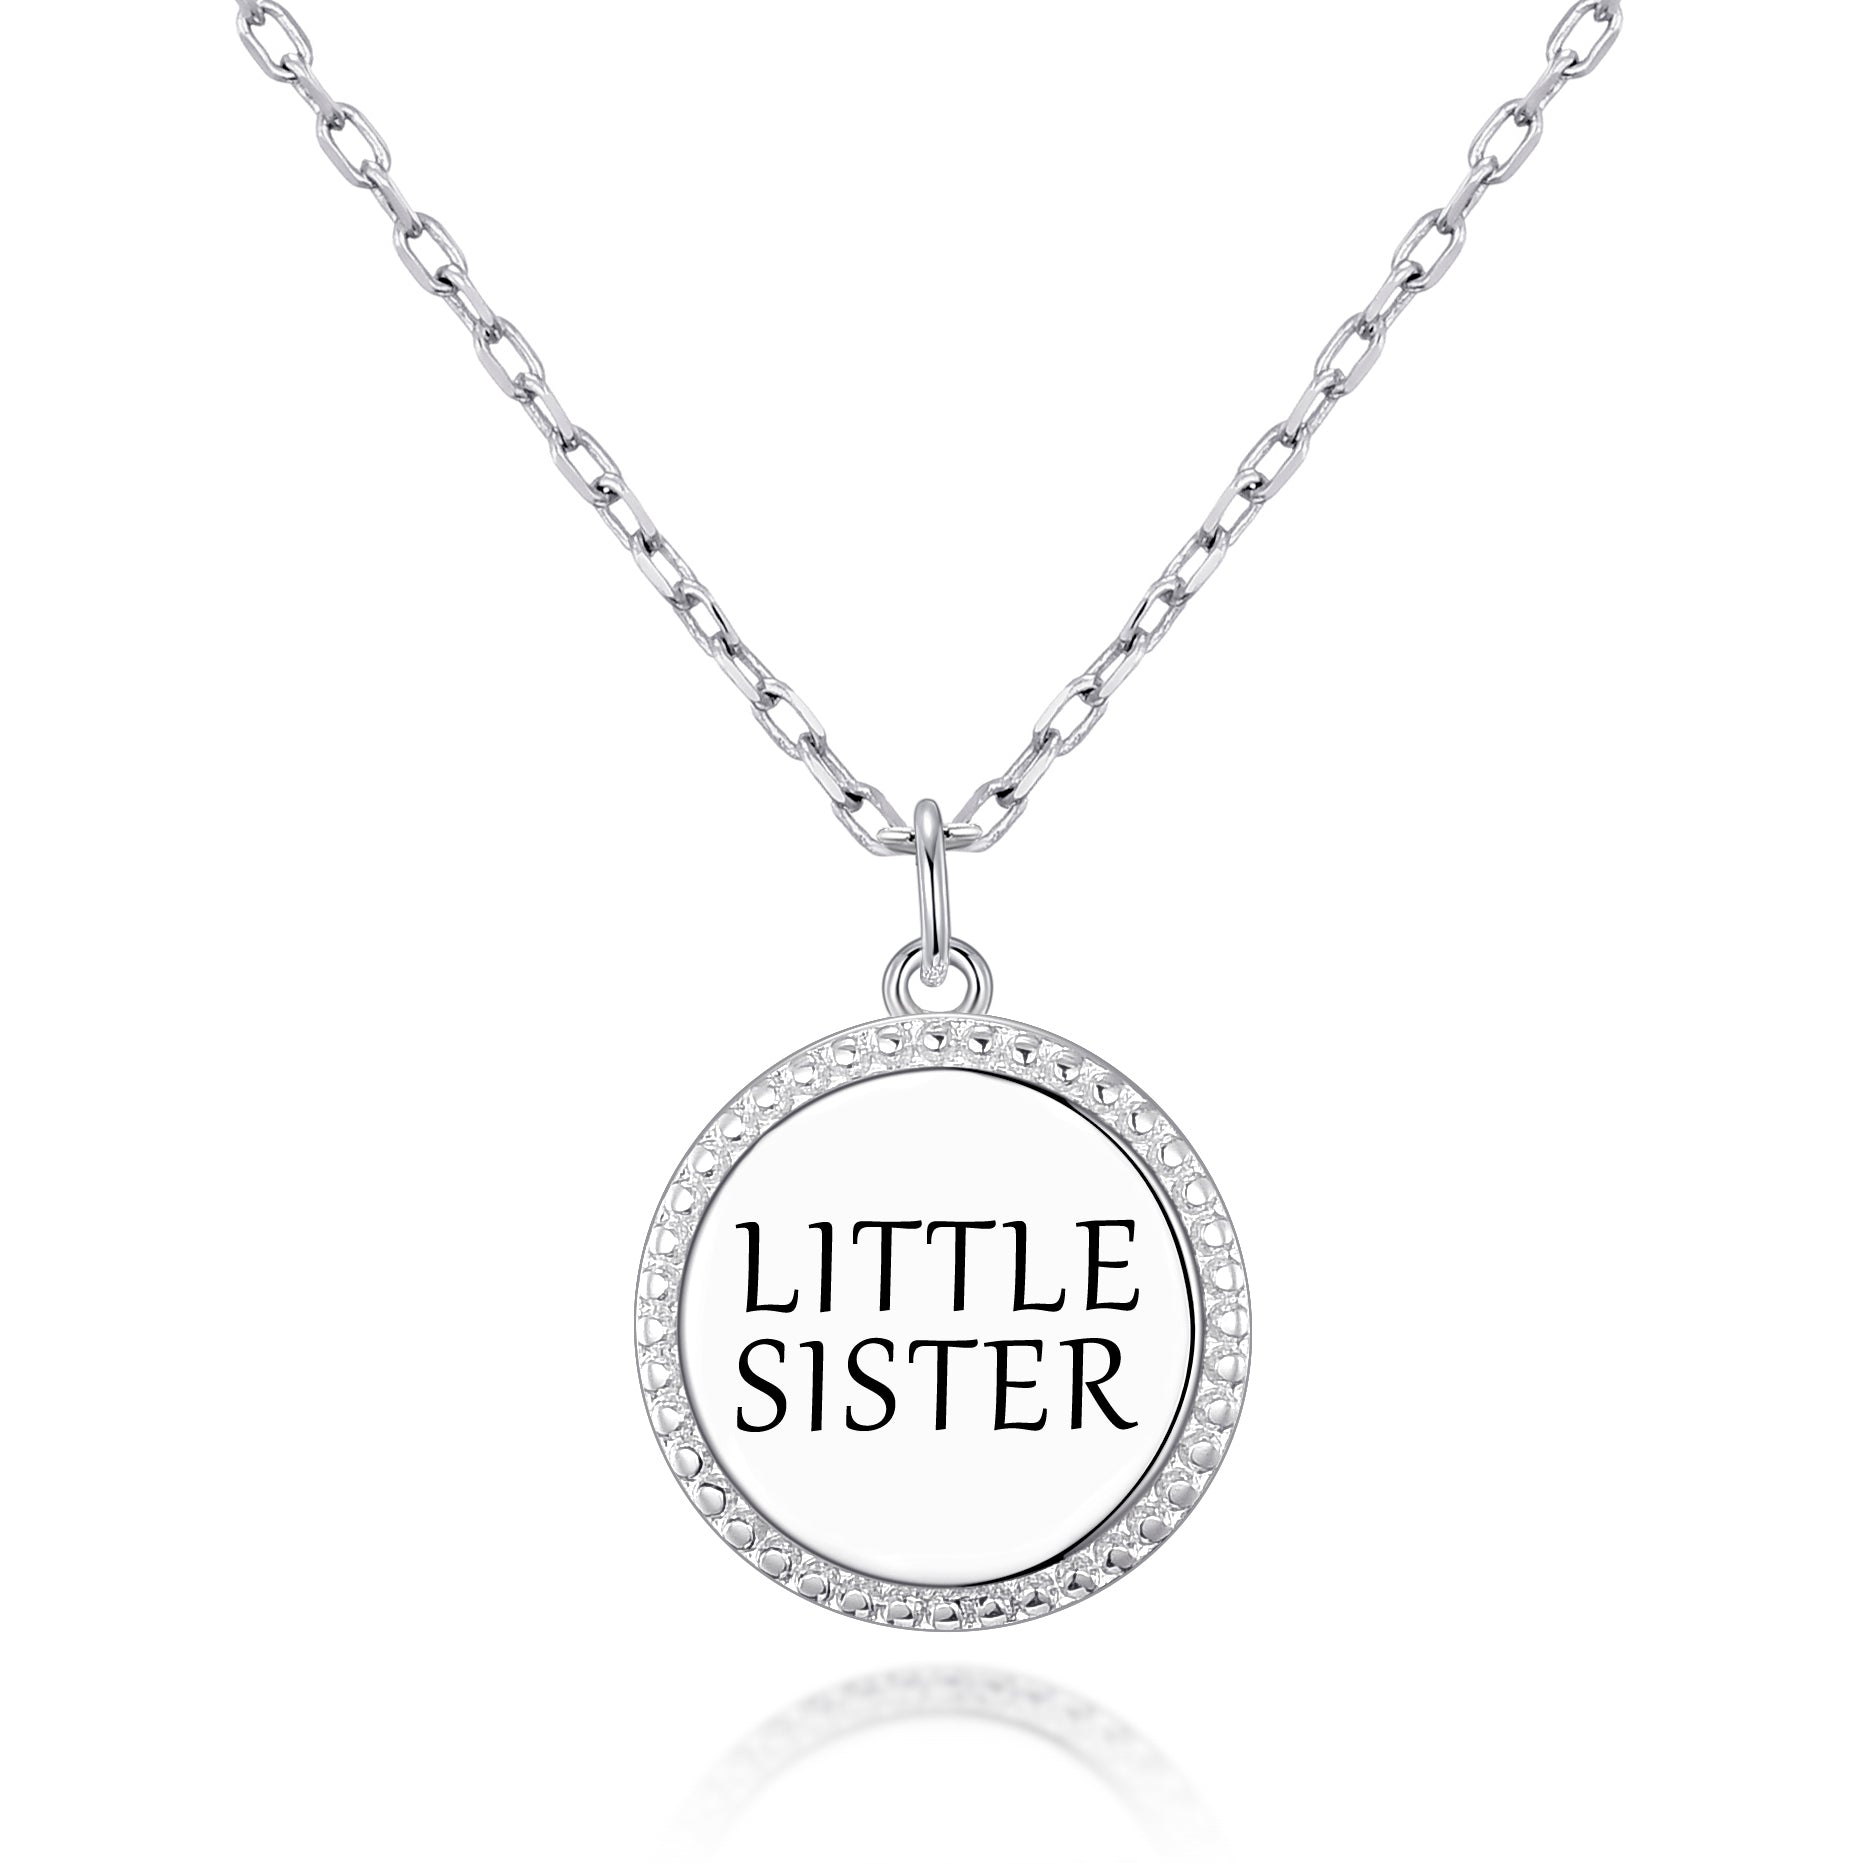 Silver Plated Filigree Disc Little Sister Necklace by Philip Jones Jewellery